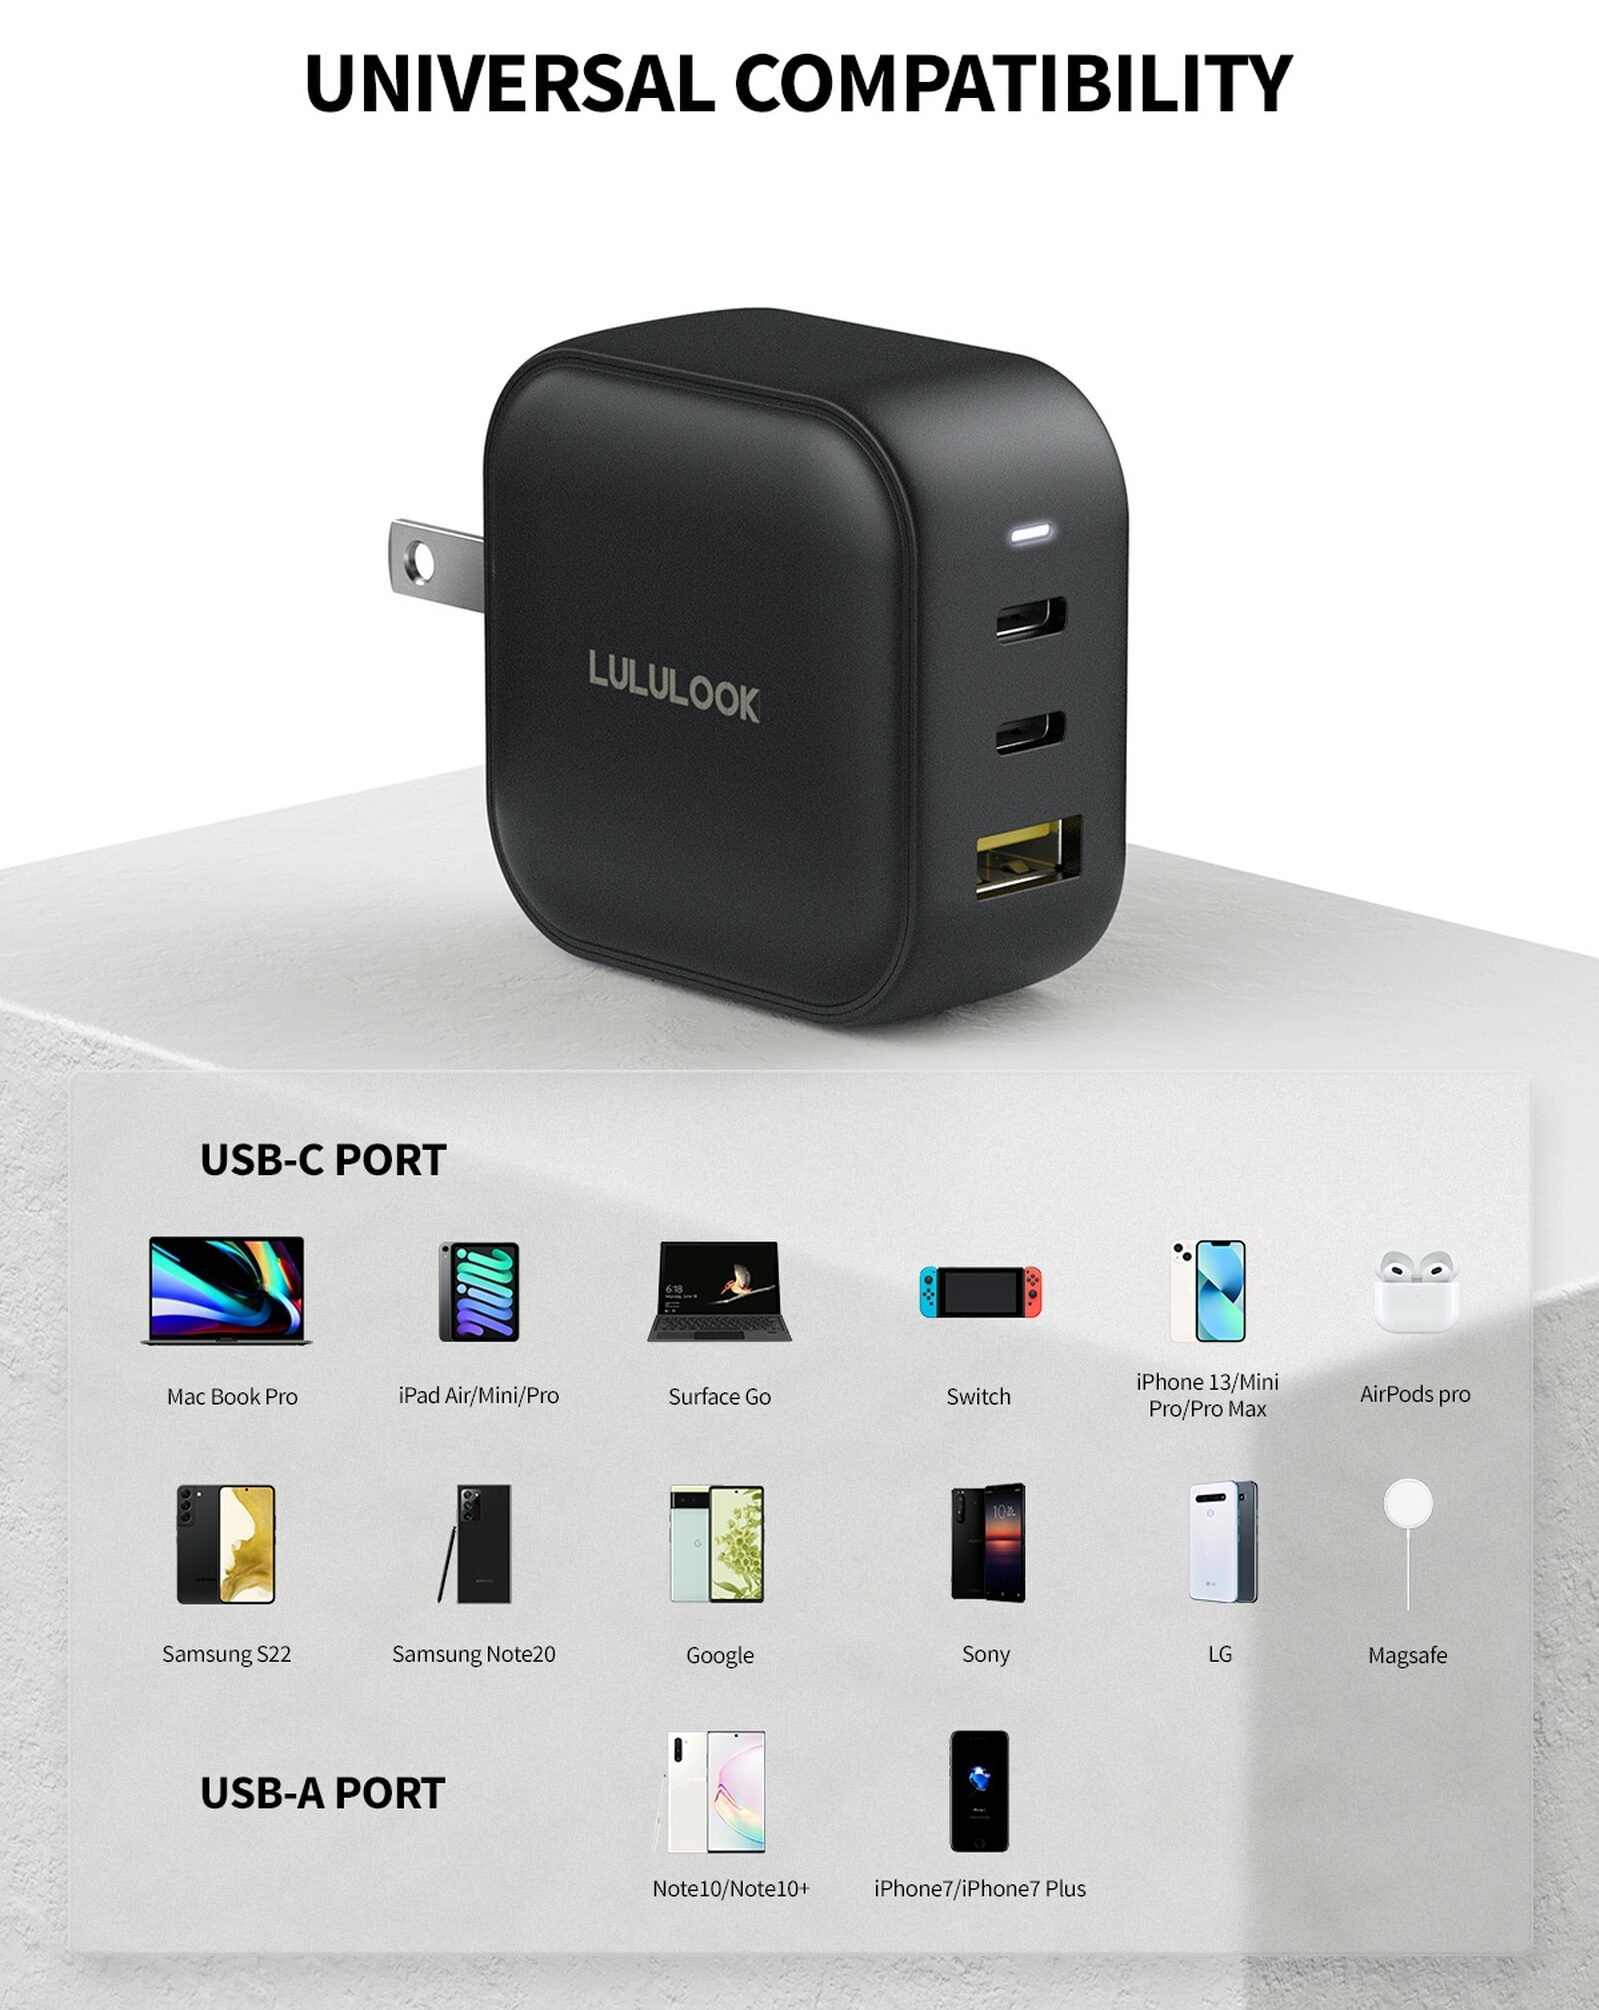 Giveaway: You can juice up all your devices with Lululook’s 65W USB-C GaN charger.